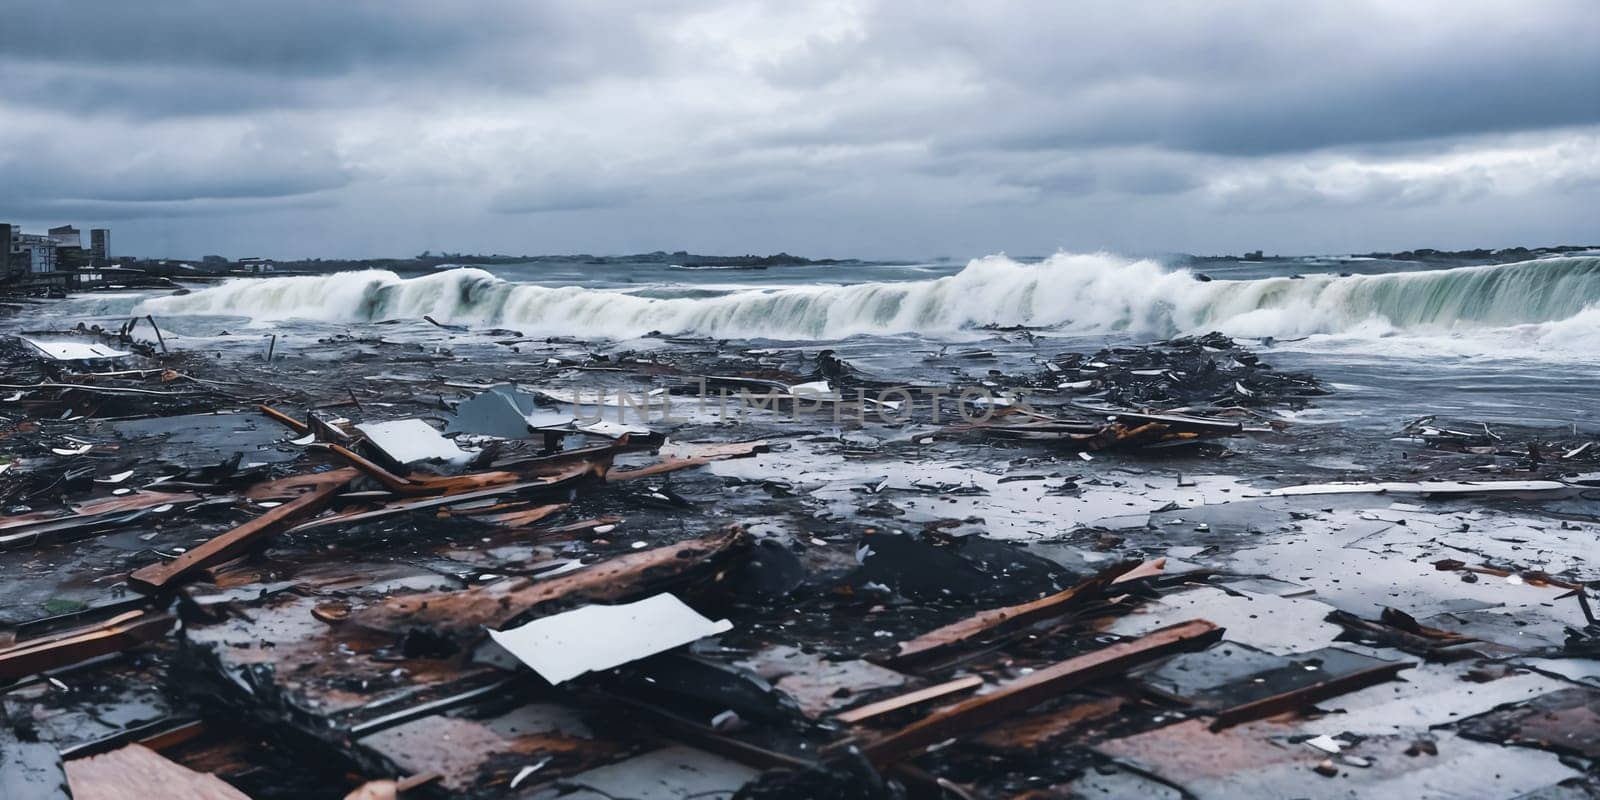 The aftermath of a powerful tsunami with debris scattered across a coastal area, emphasizing the sheer scale of destruction caused by the relentless waves. Panorama